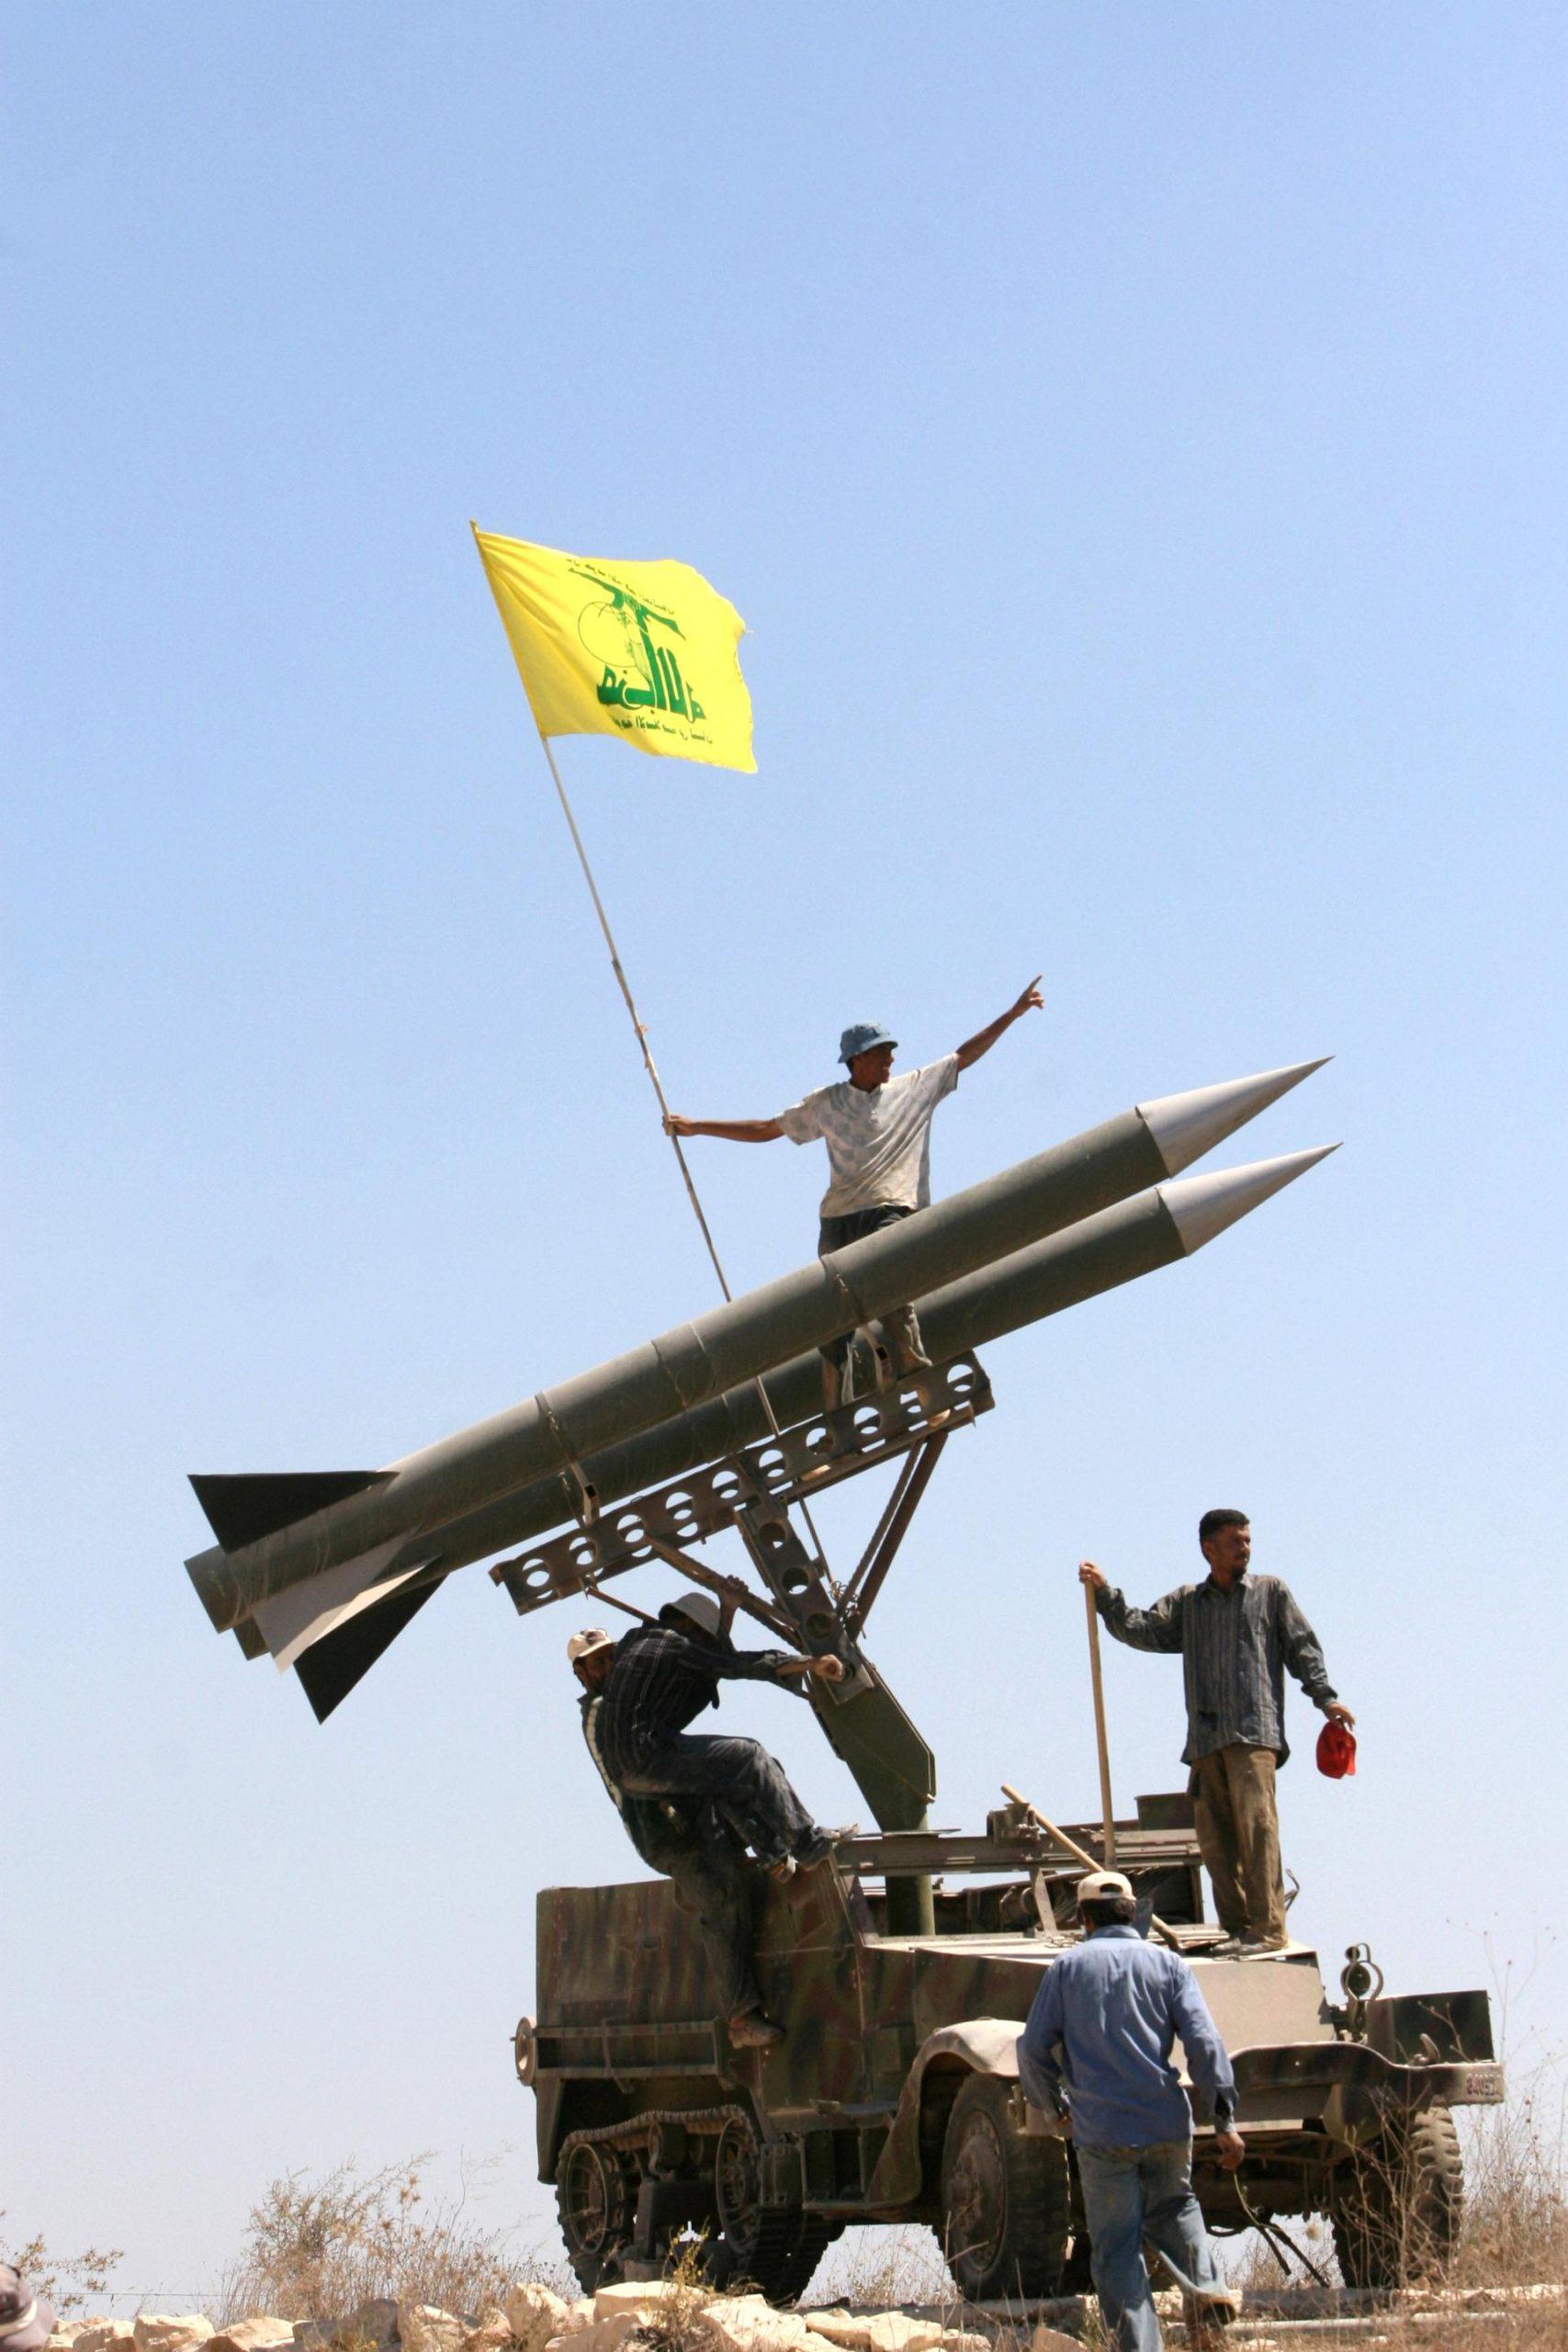 Hezbollah has doubled precision-guided missile arsenal, leader Hassan Nasrallah says